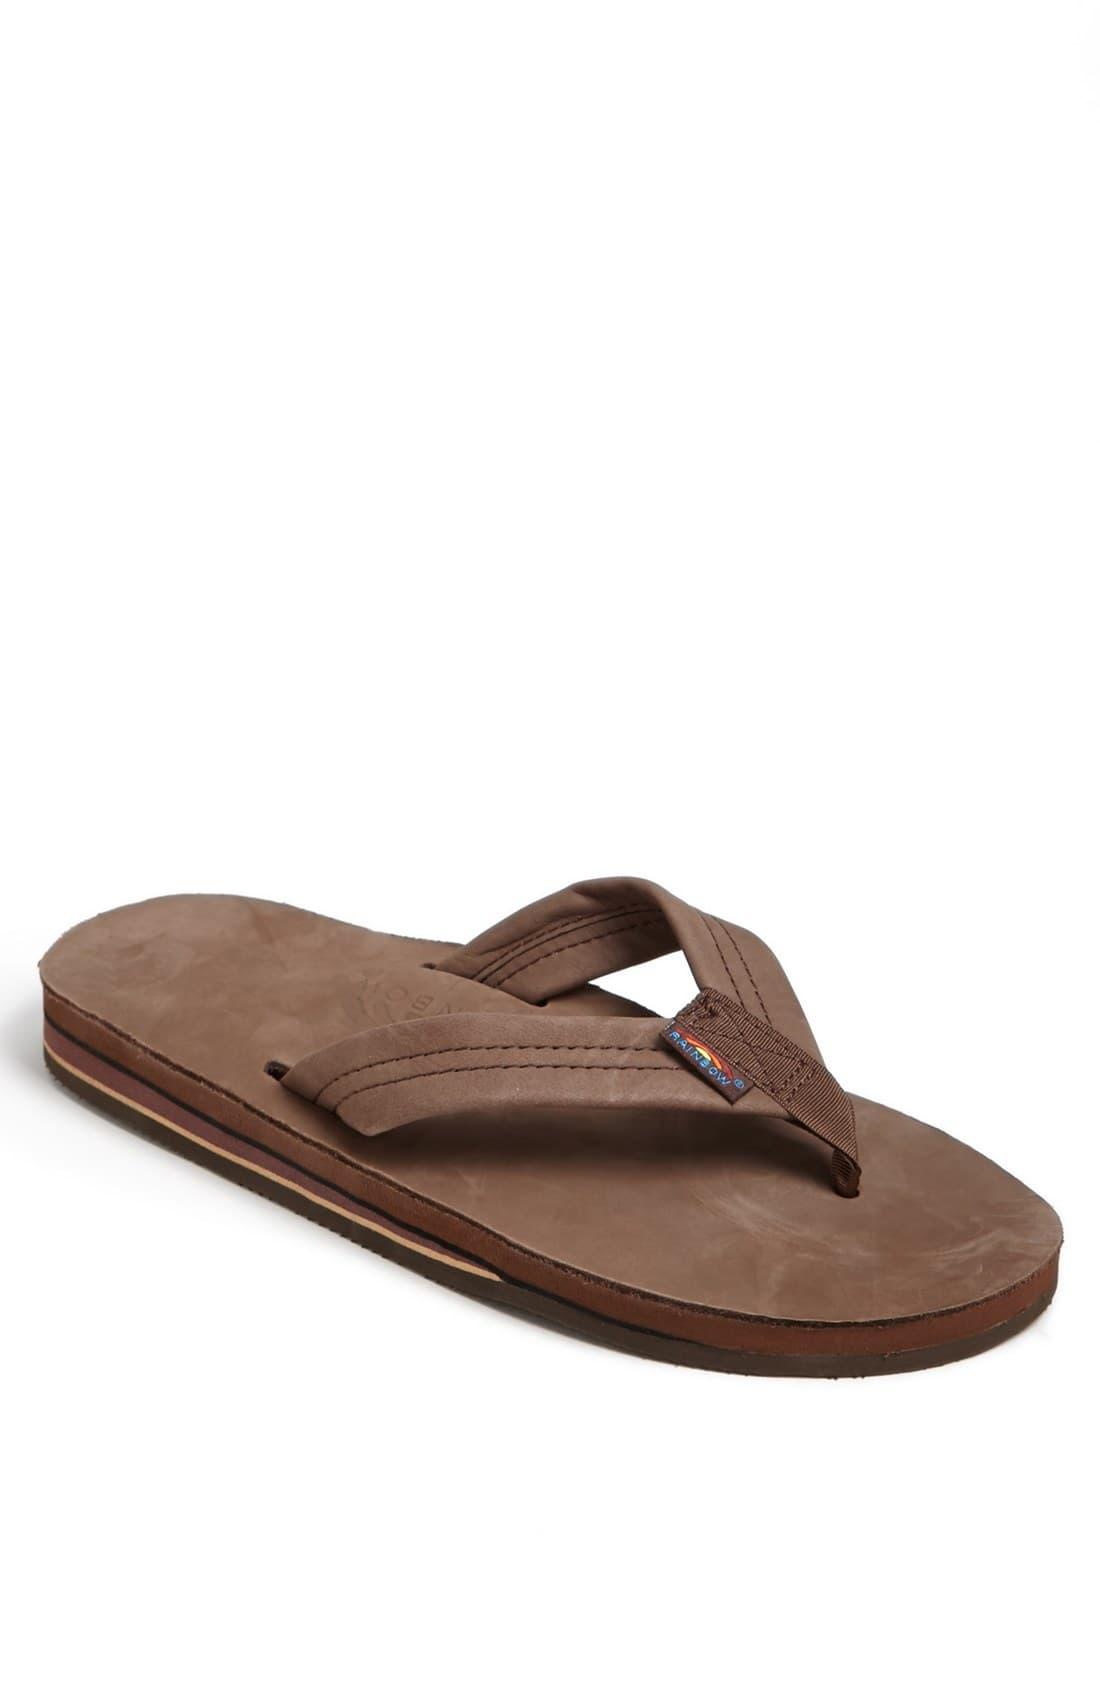 Rainbow Sandals Leather Rainbow '302alts' Flip Flop in Brown for Men - Lyst